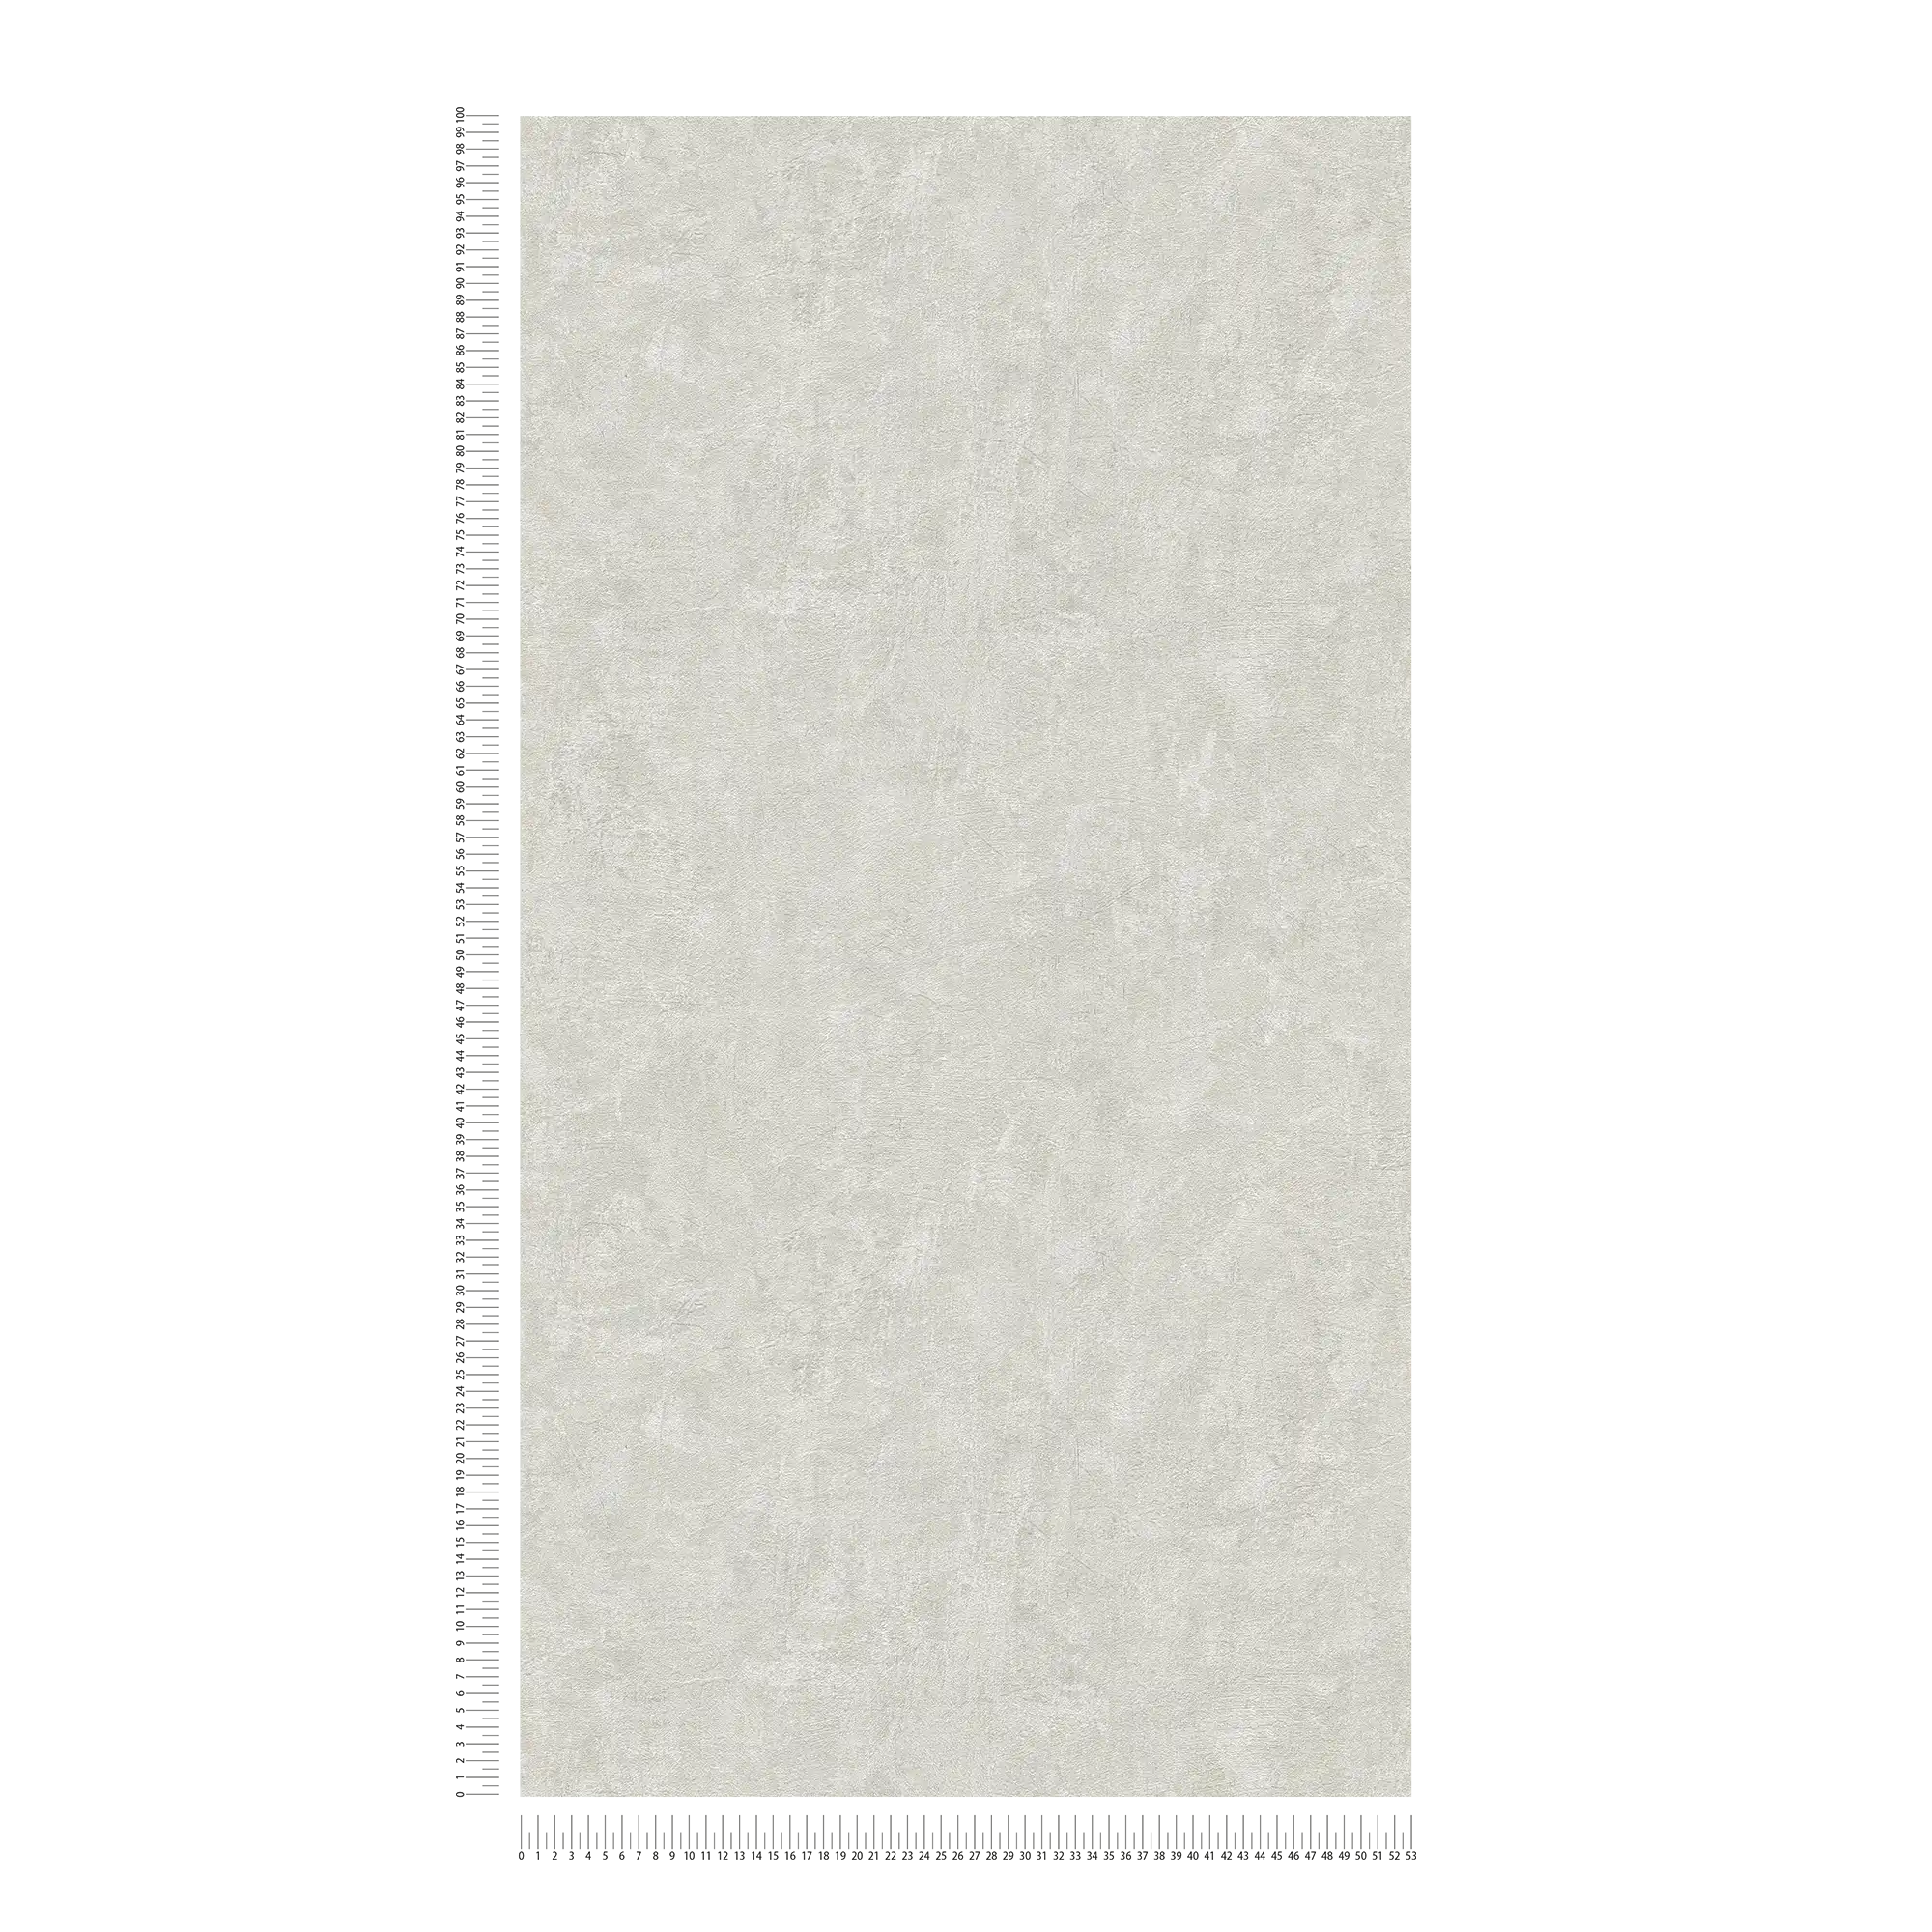             Wallpaper with plain textured pattern PVC-free - Grey
        